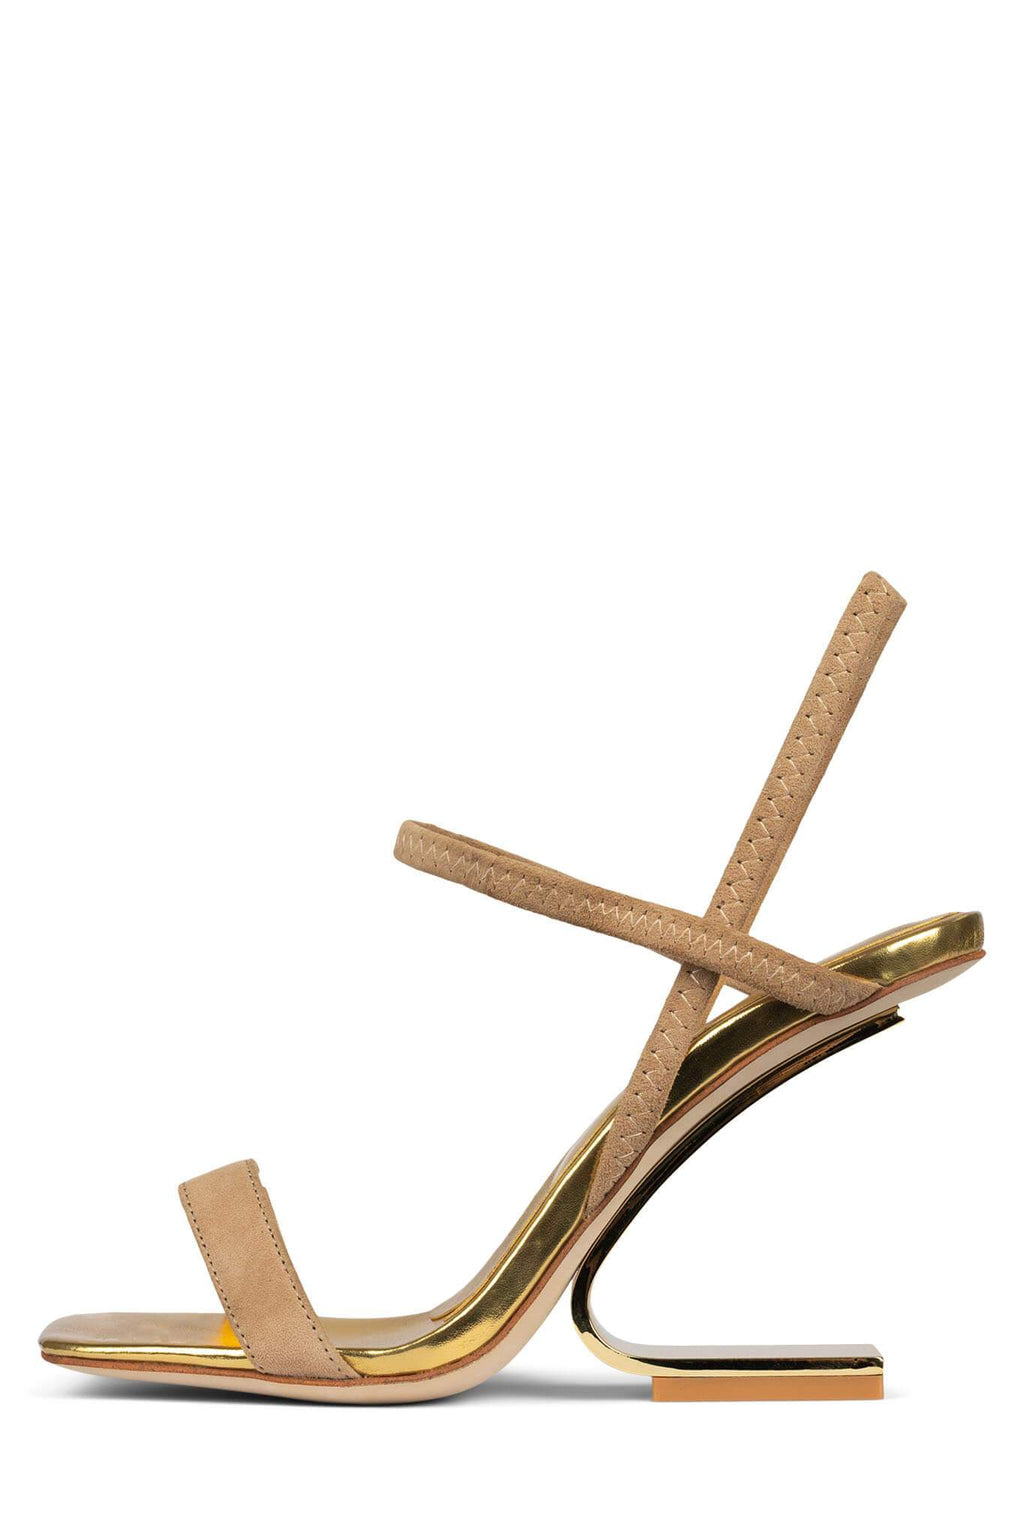 GEOMETRIC Heeled Sandal STRATEGY Dark Natural Suede Gold 6 